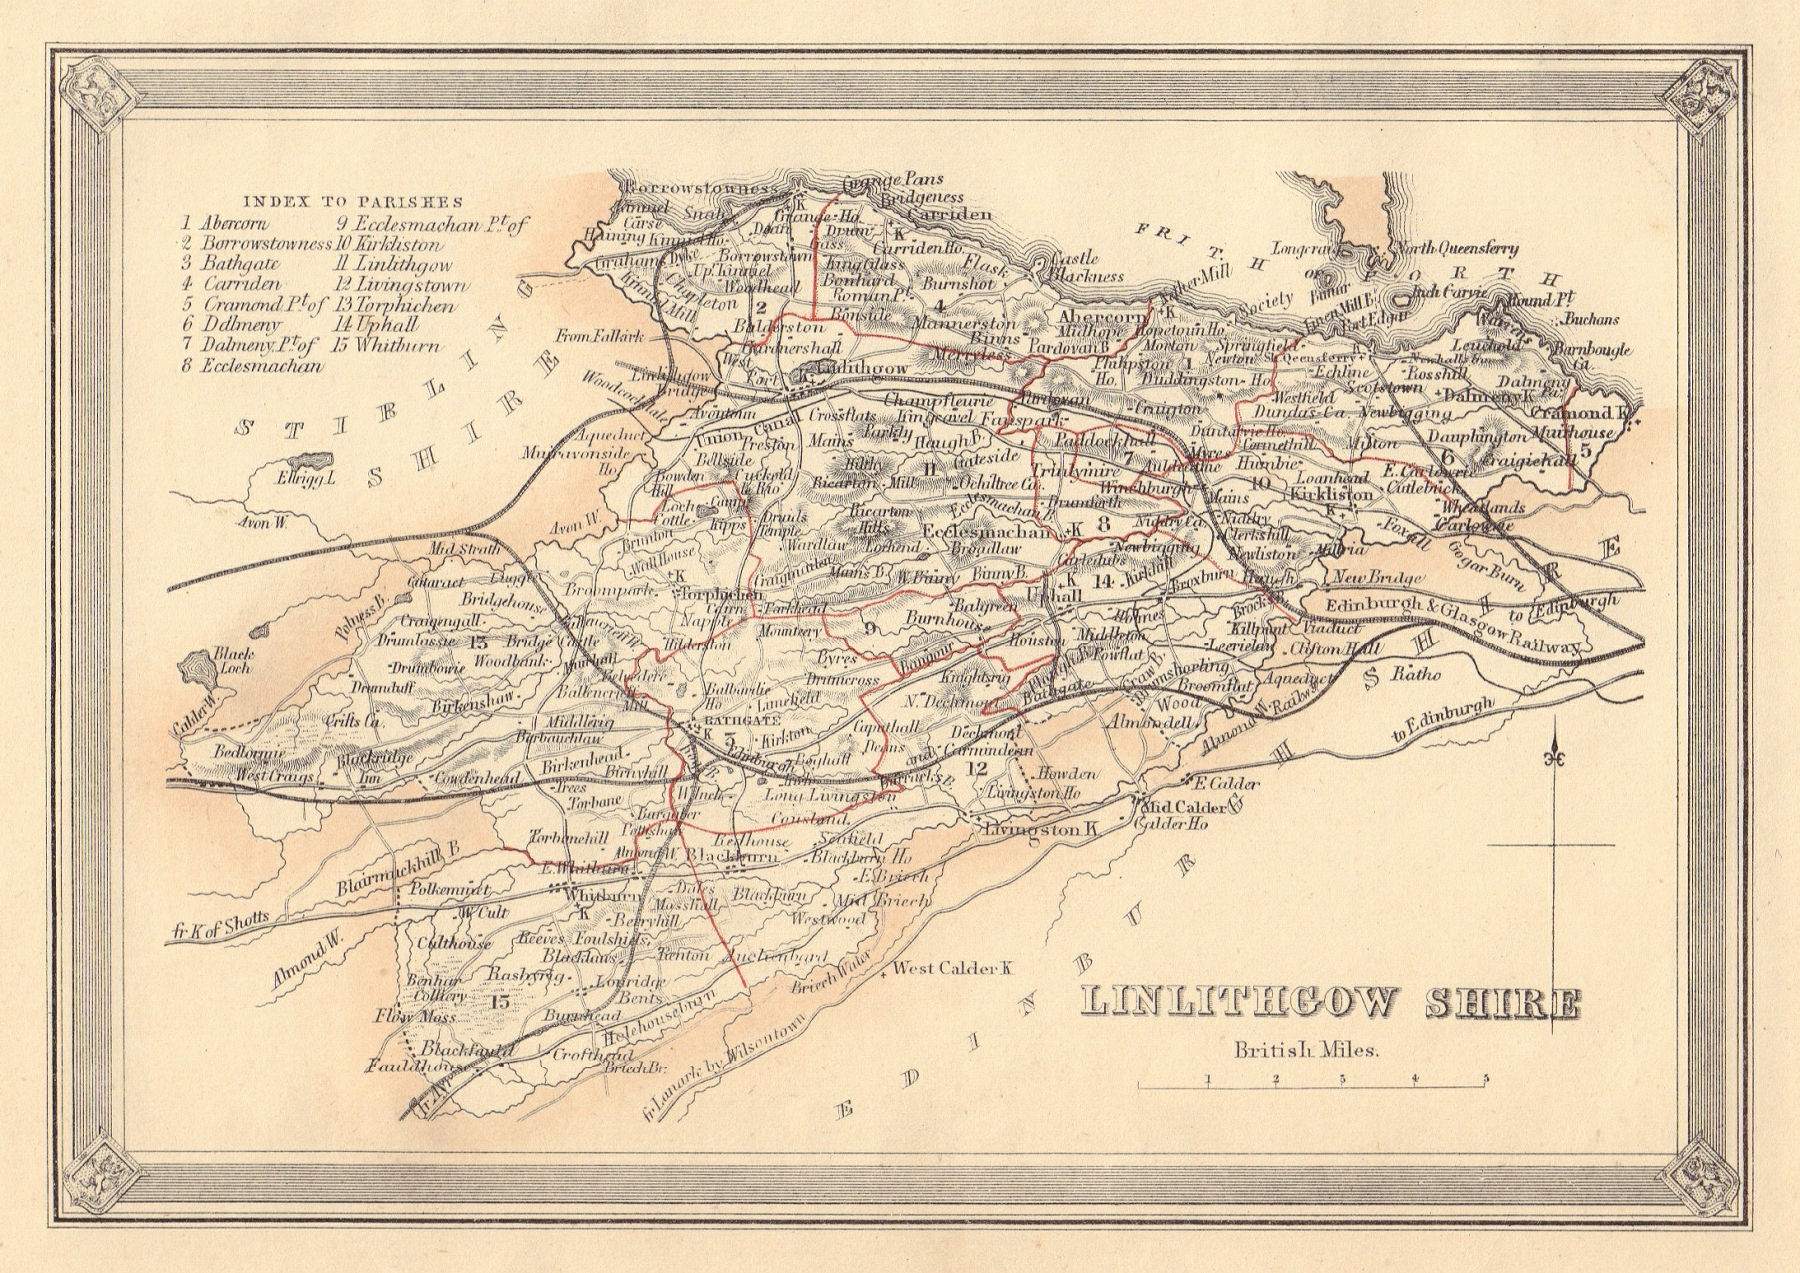 Associate Product Decorative antique county map of Linlithgowshire, Scotland. FULLARTON 1866